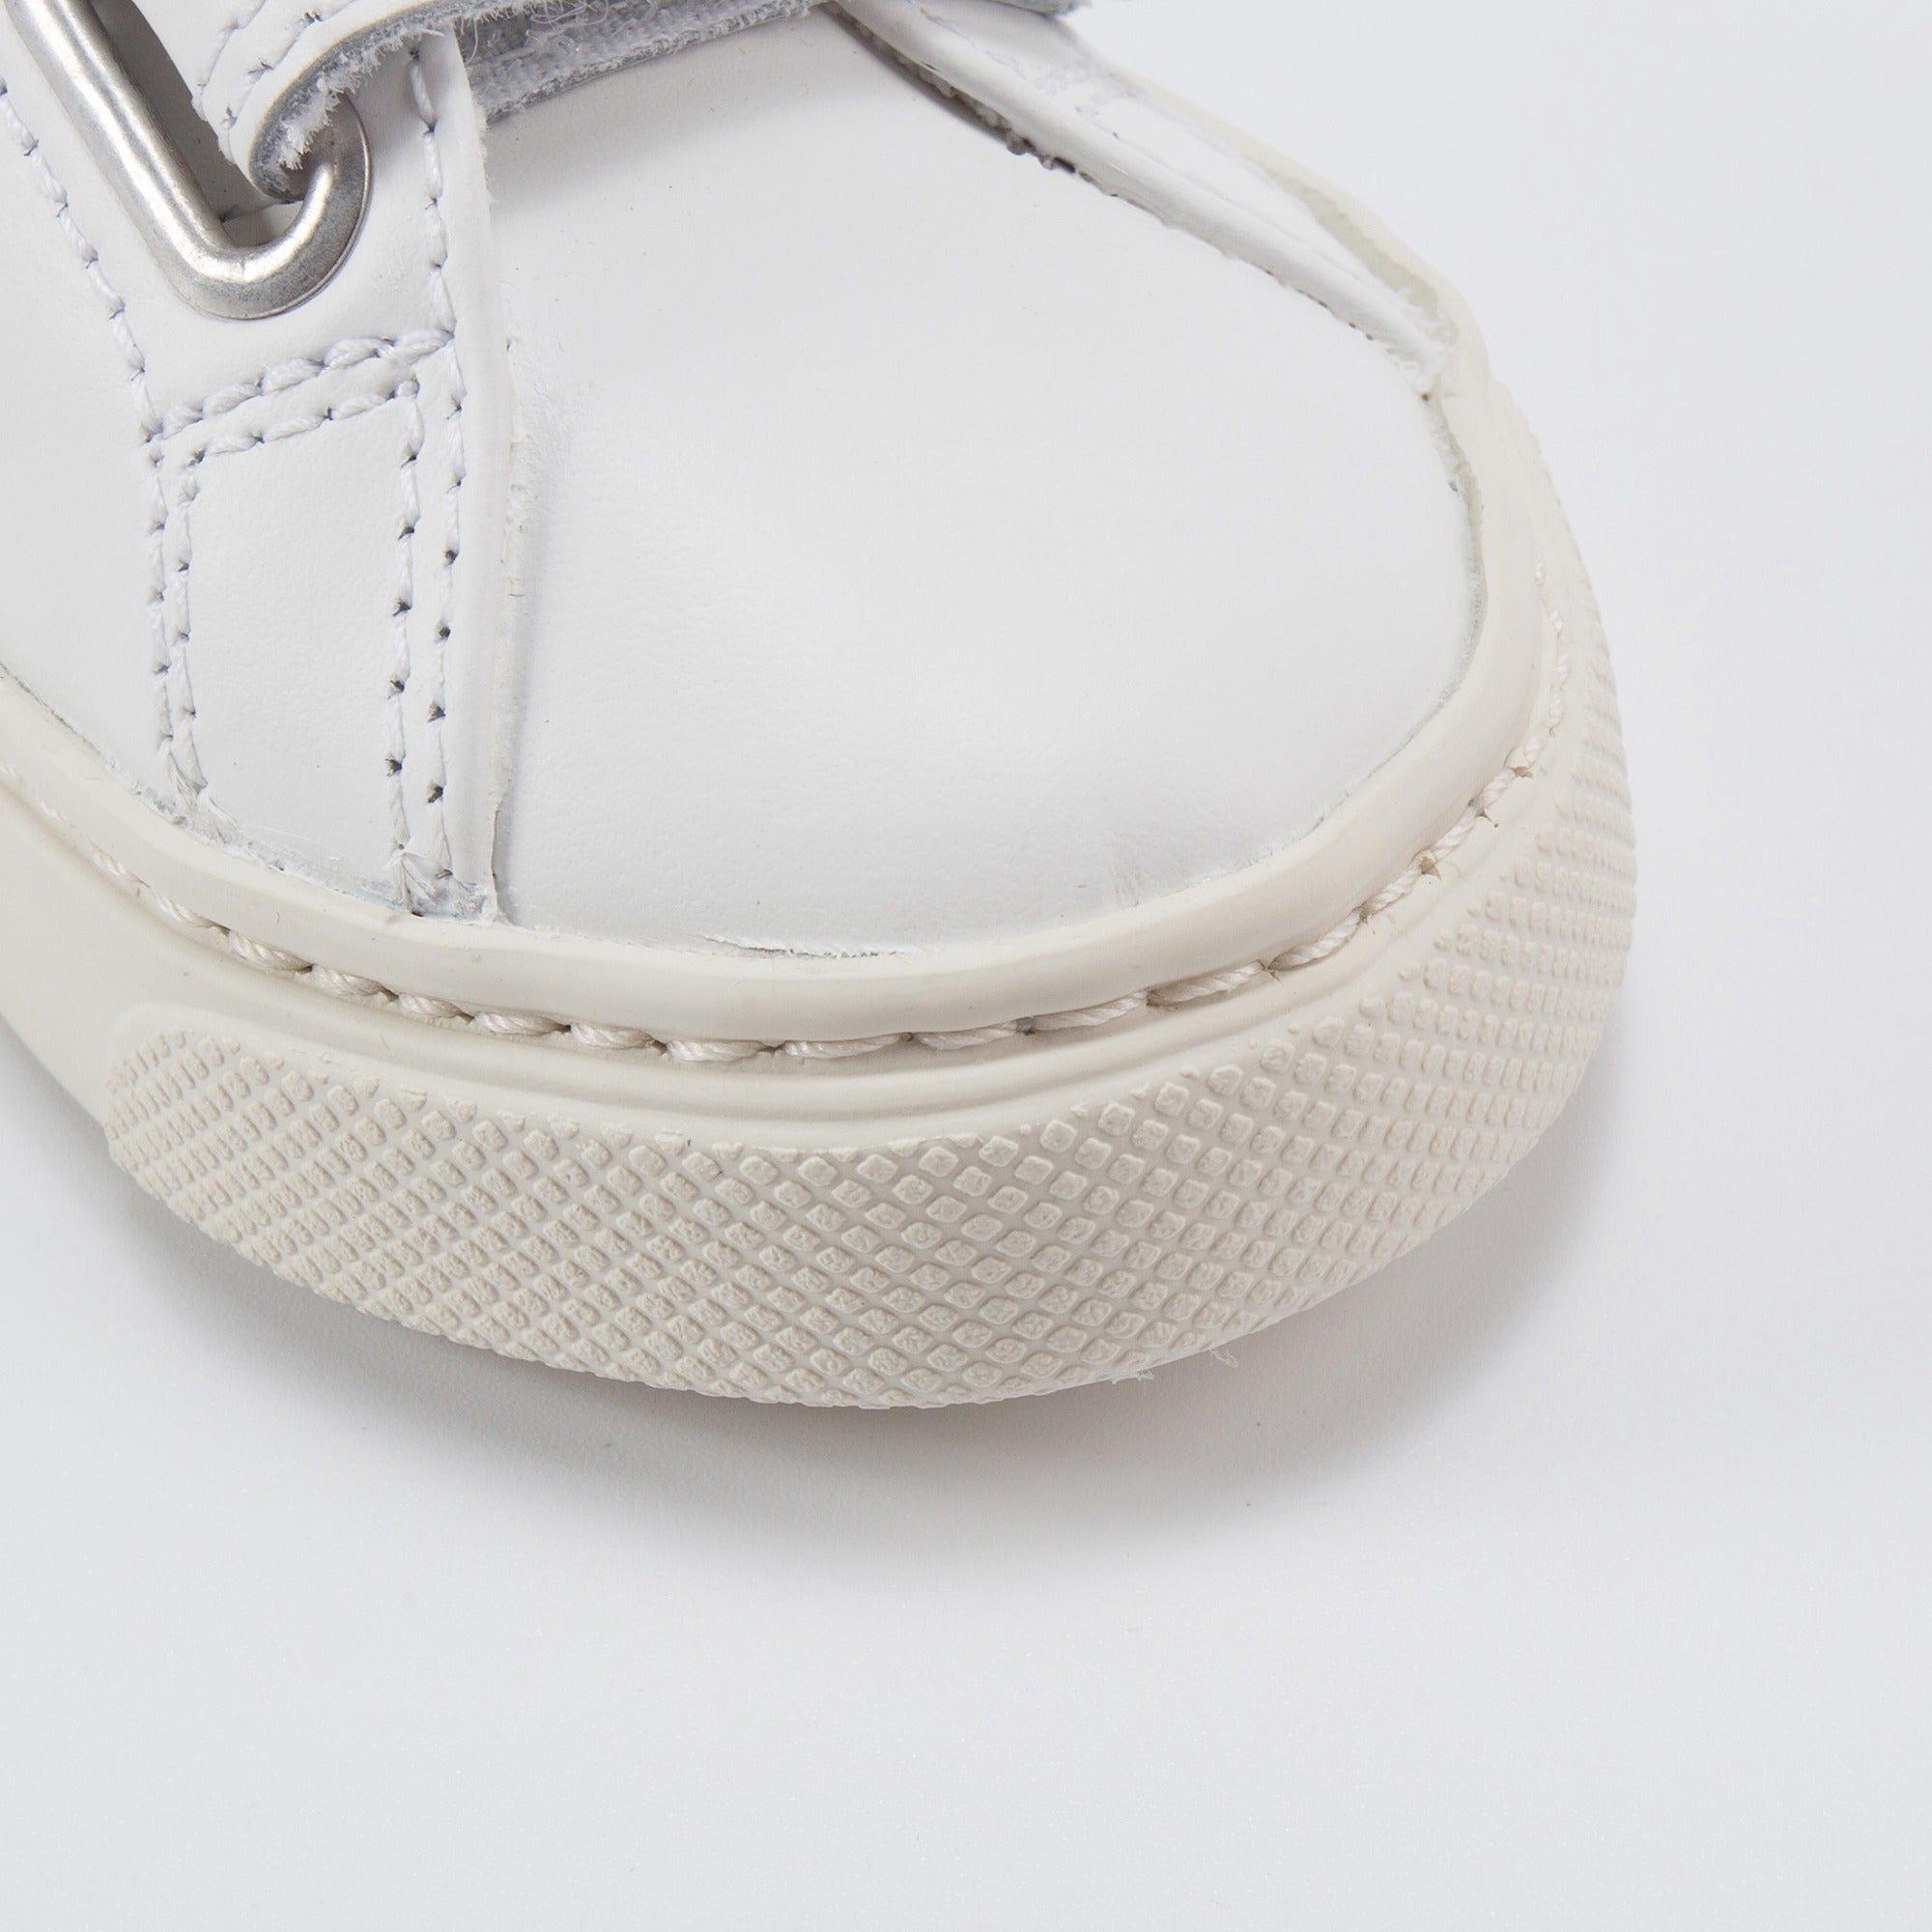 Girls & Boys White Leather Velcro With Blue "V" Shoes